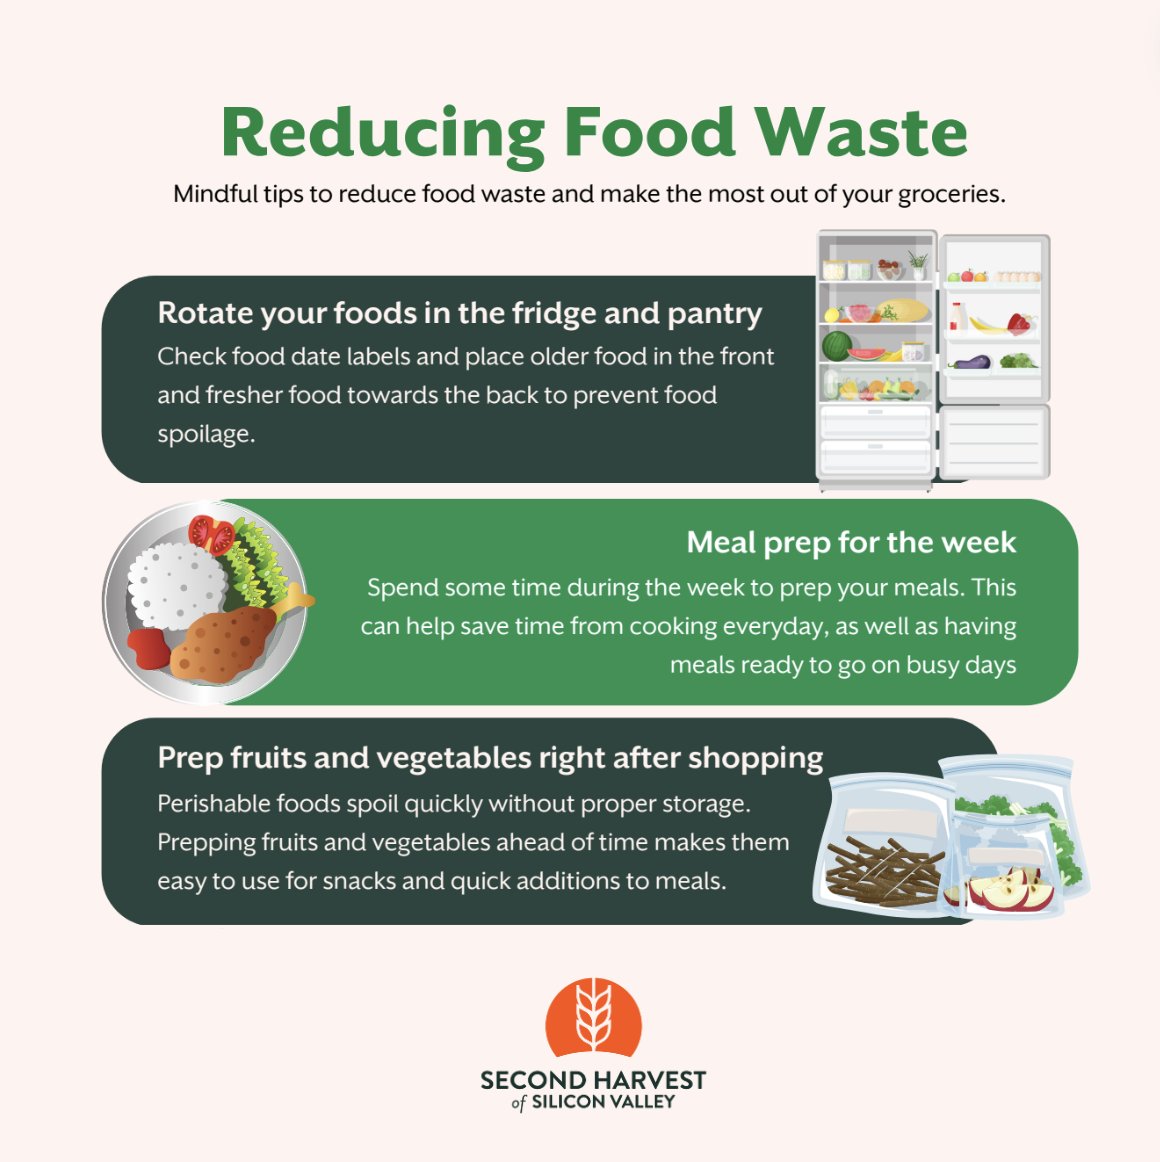 🌱✨ It's Stop Food Waste Day! Let's make a difference together with these mindful tips to make the most of our groceries. Learn more: shfb.online/stopfoodwaste